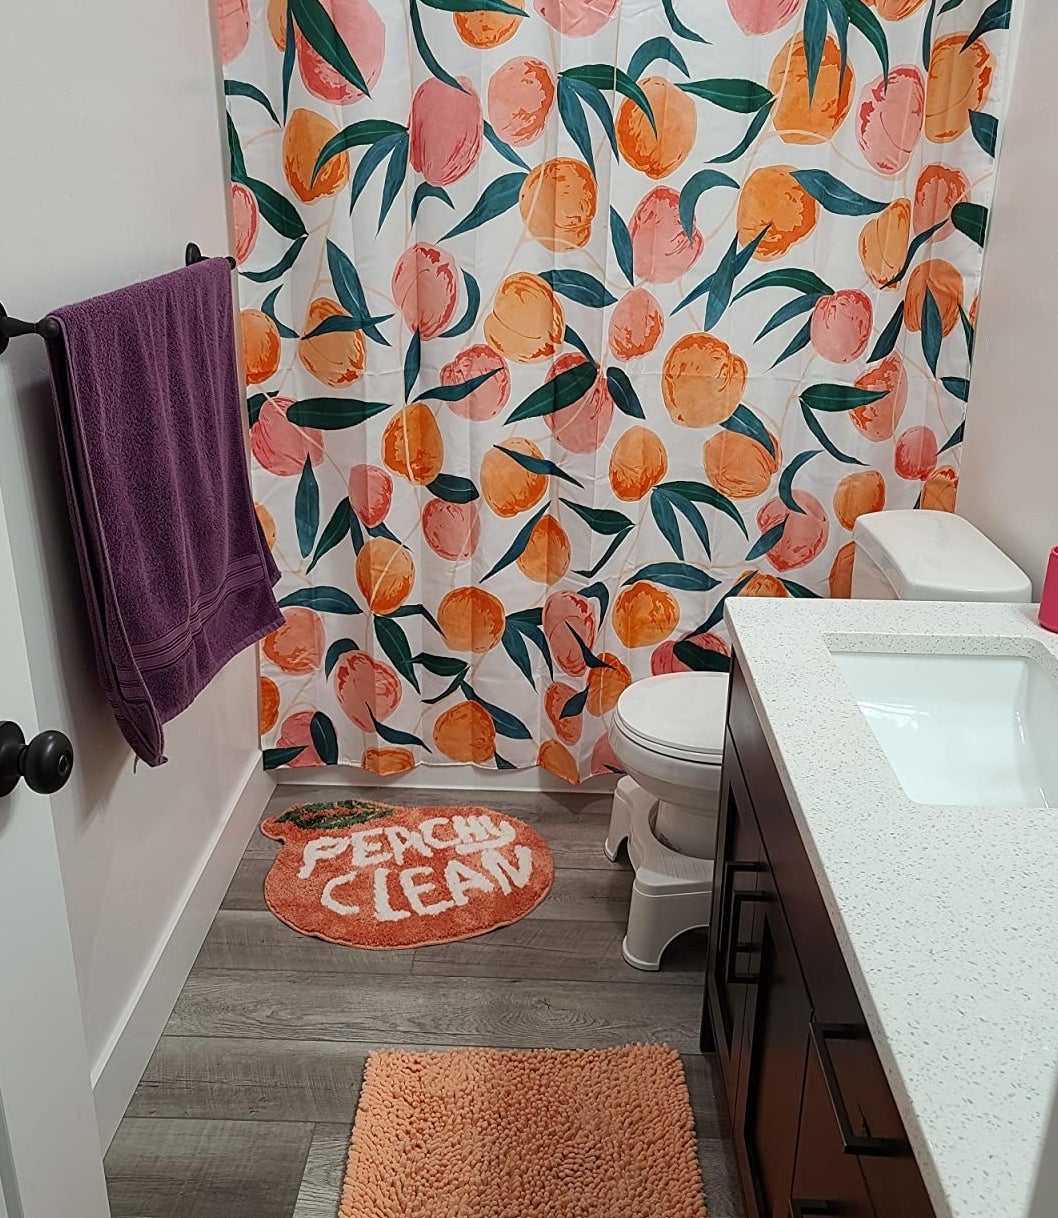 reviewer image of the white shower curtain with peach and orange illustrations of peaches with green leaves